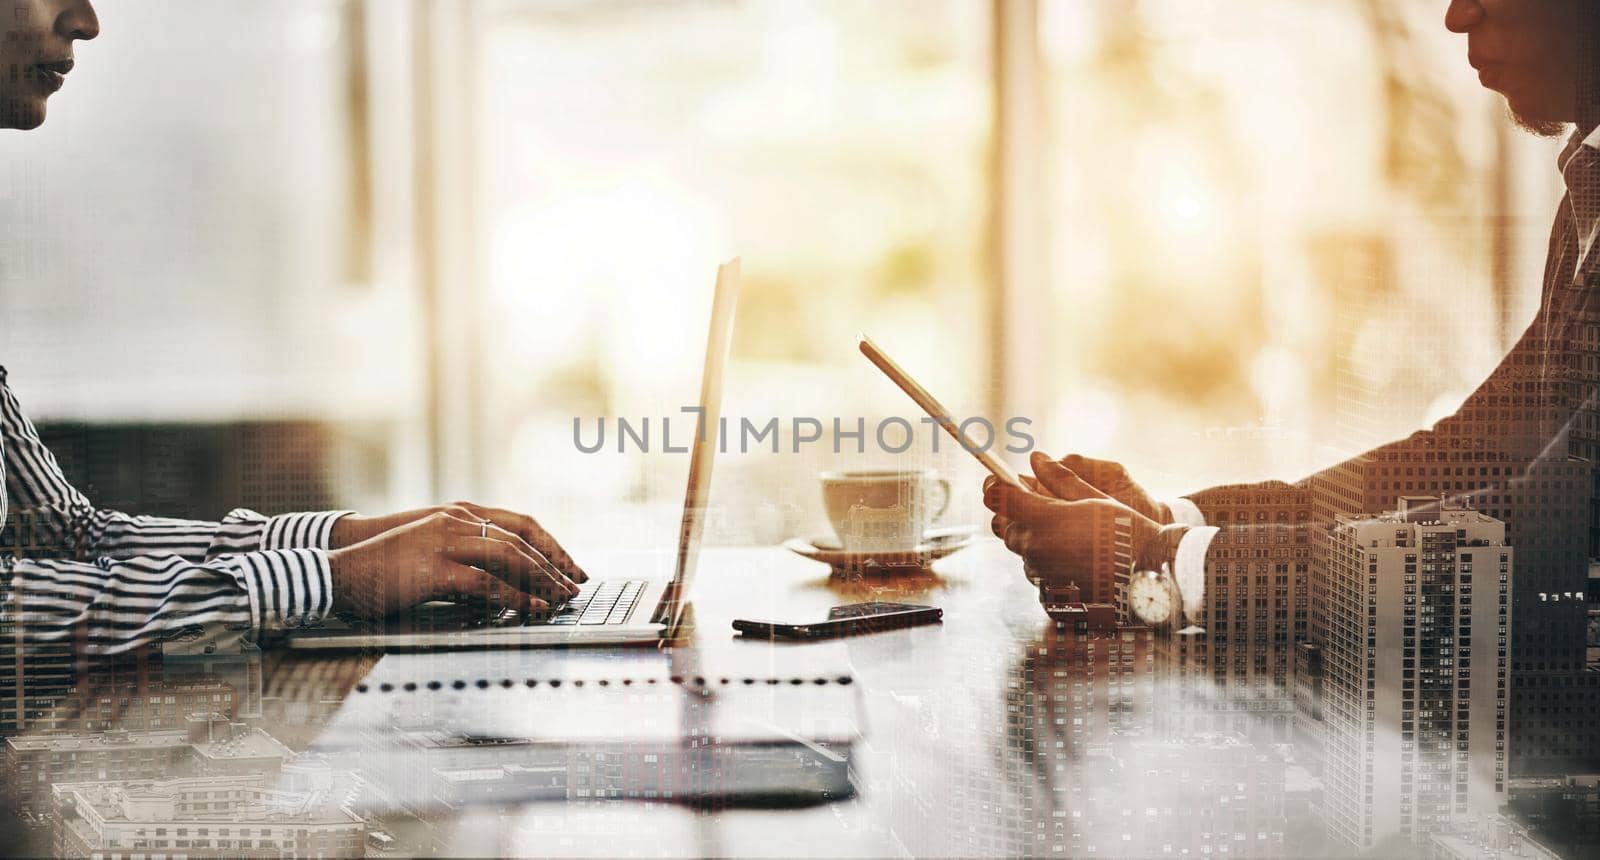 Their devices keep them connected to everything in business. Closeup shot of two unrecognizable businesspeople using digital devices during a meeting in an office